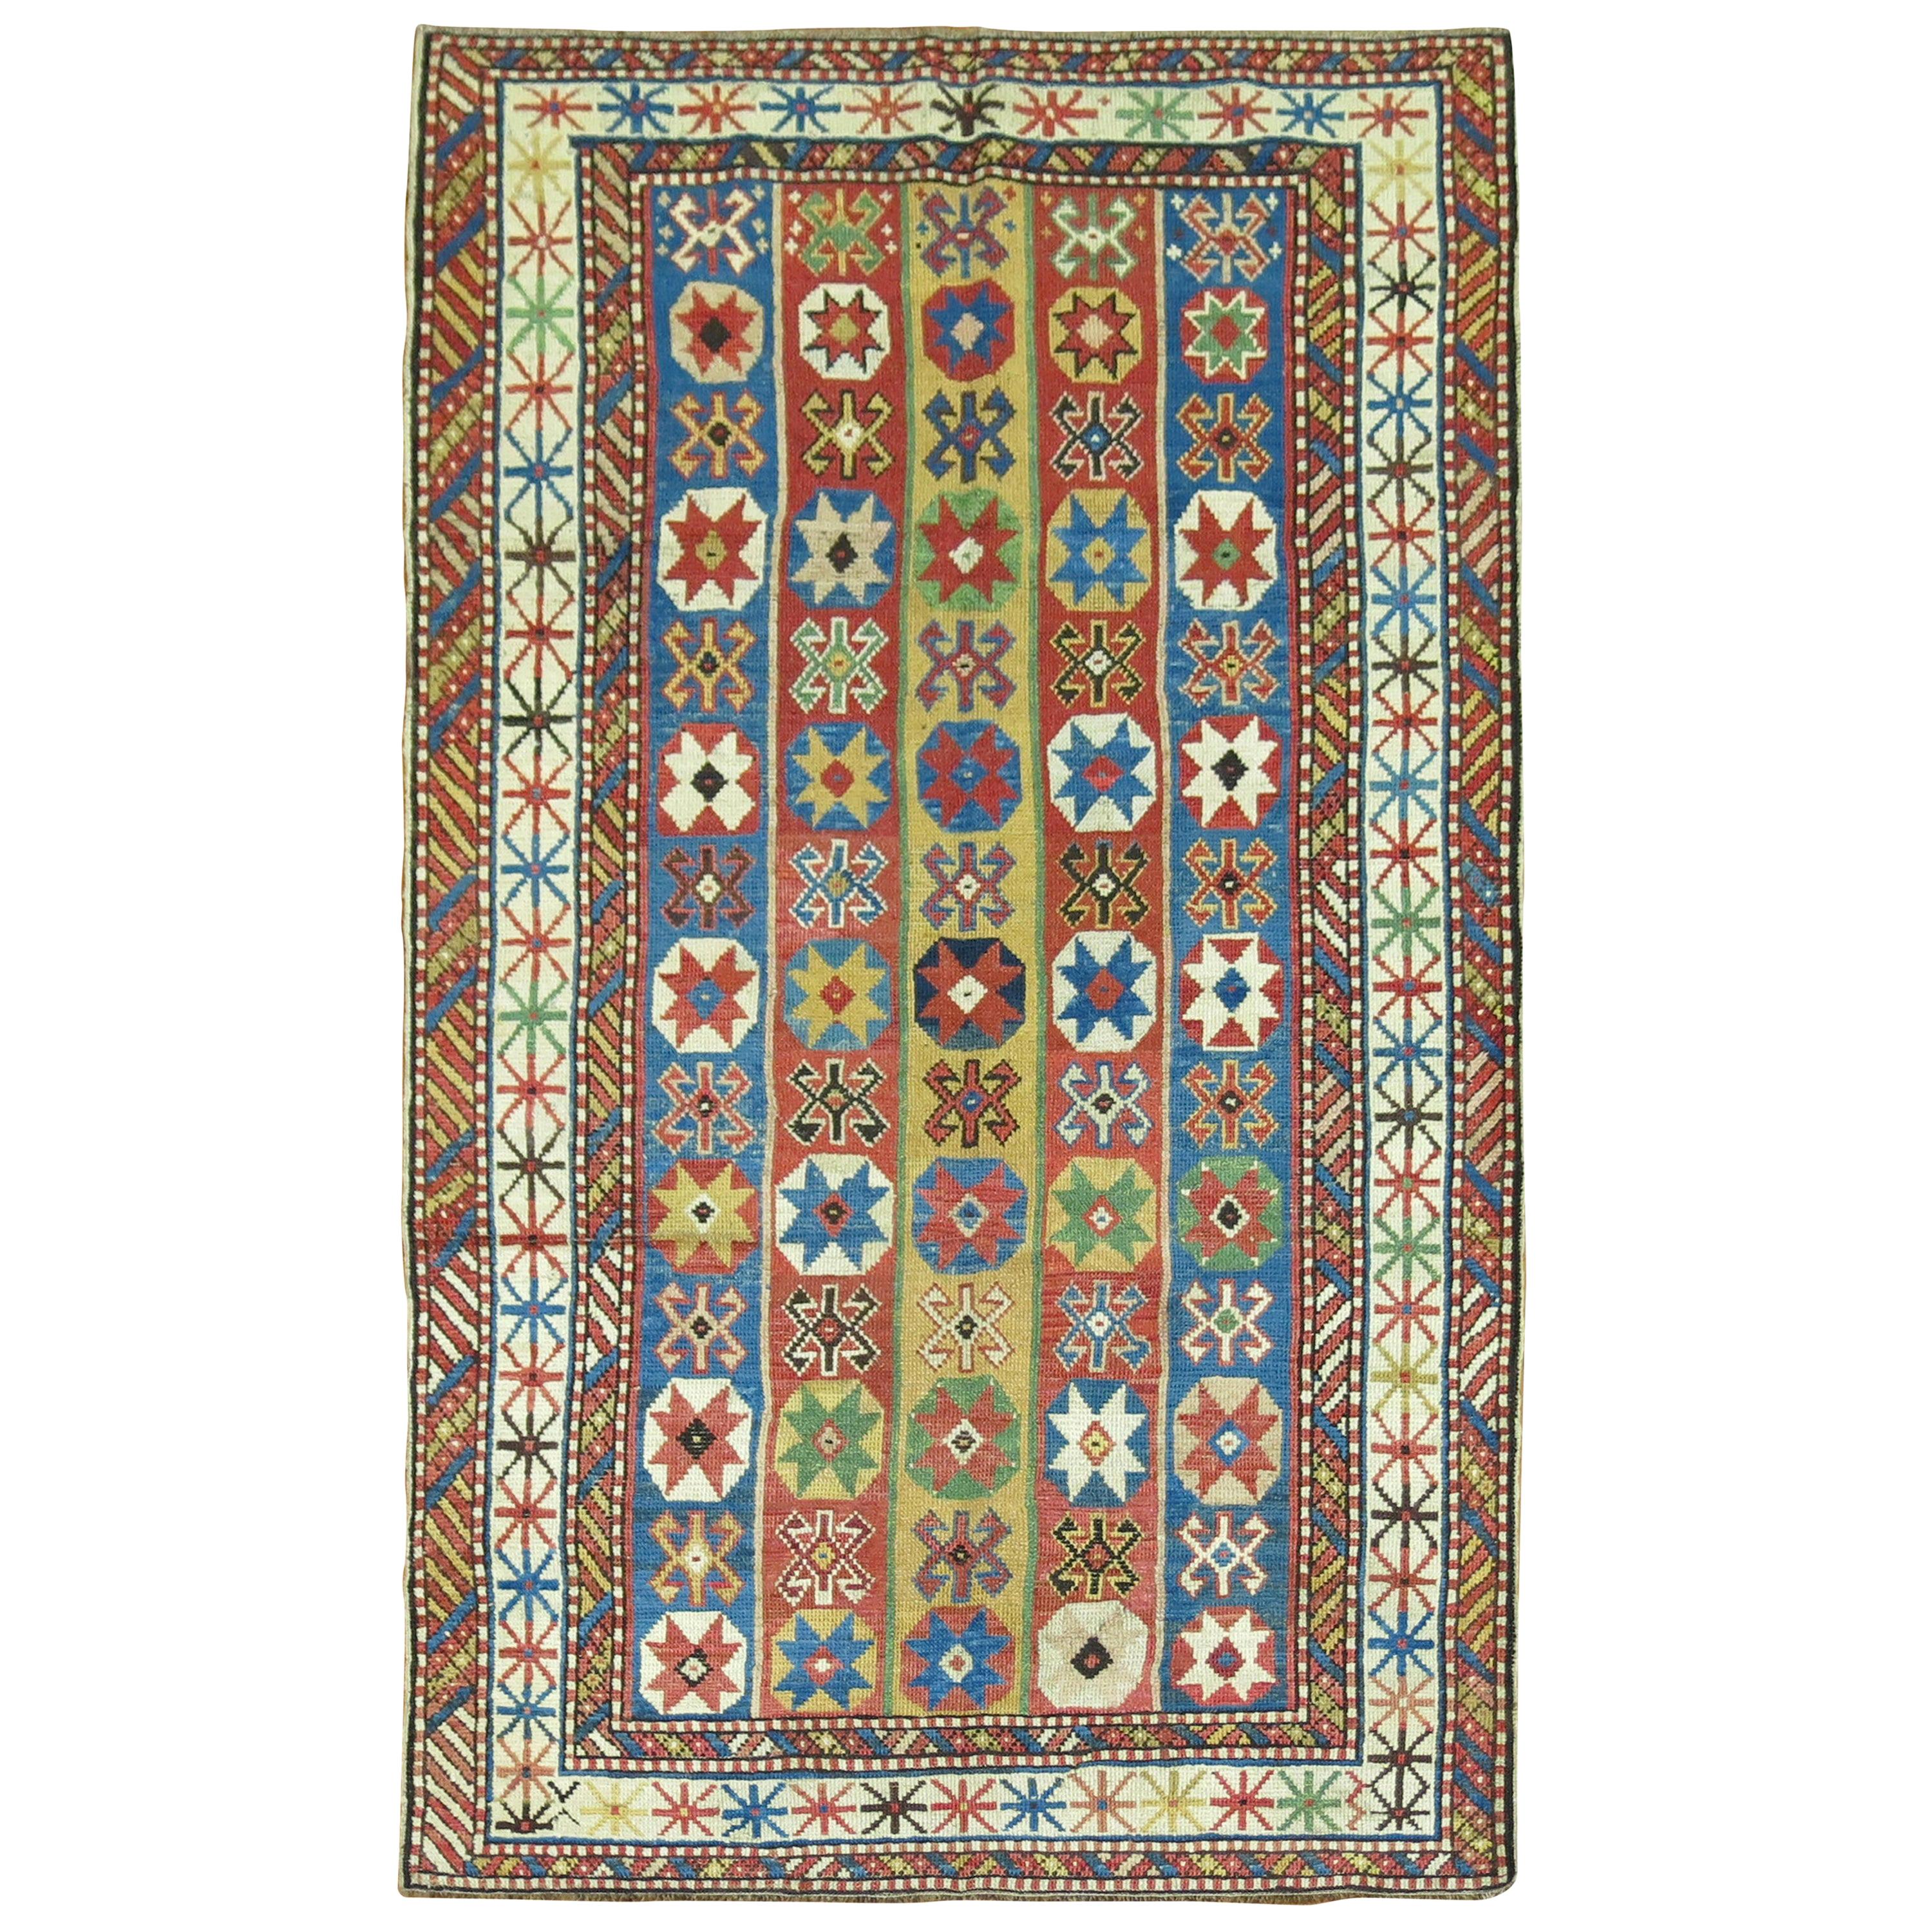 Whimsical Early 20th Century Decorative Antique Caucasian Tribal Rug